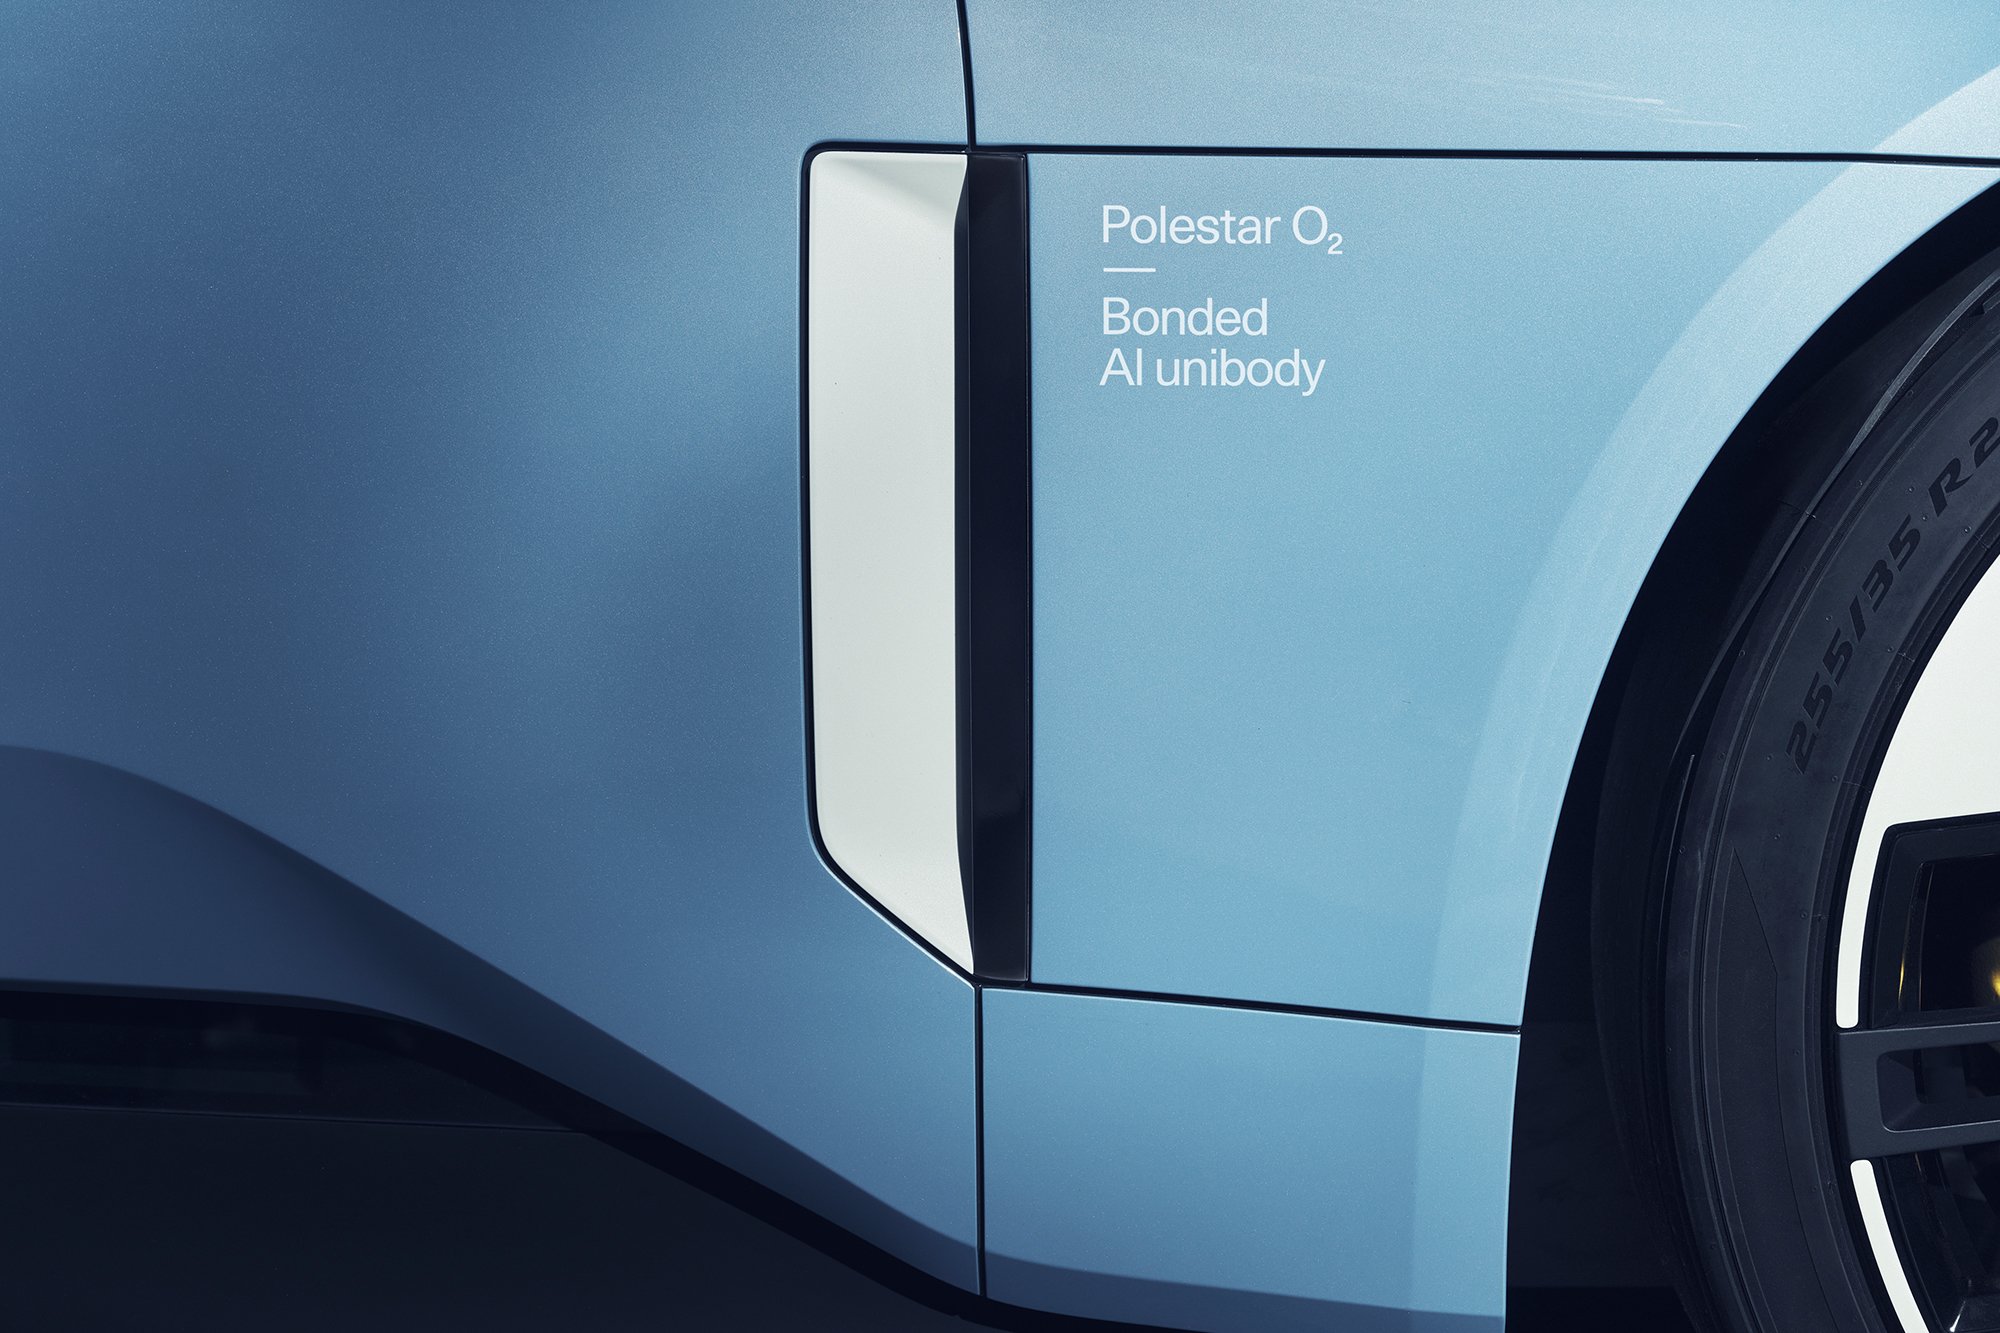 Exterior design of the electric roadster Polestar 02